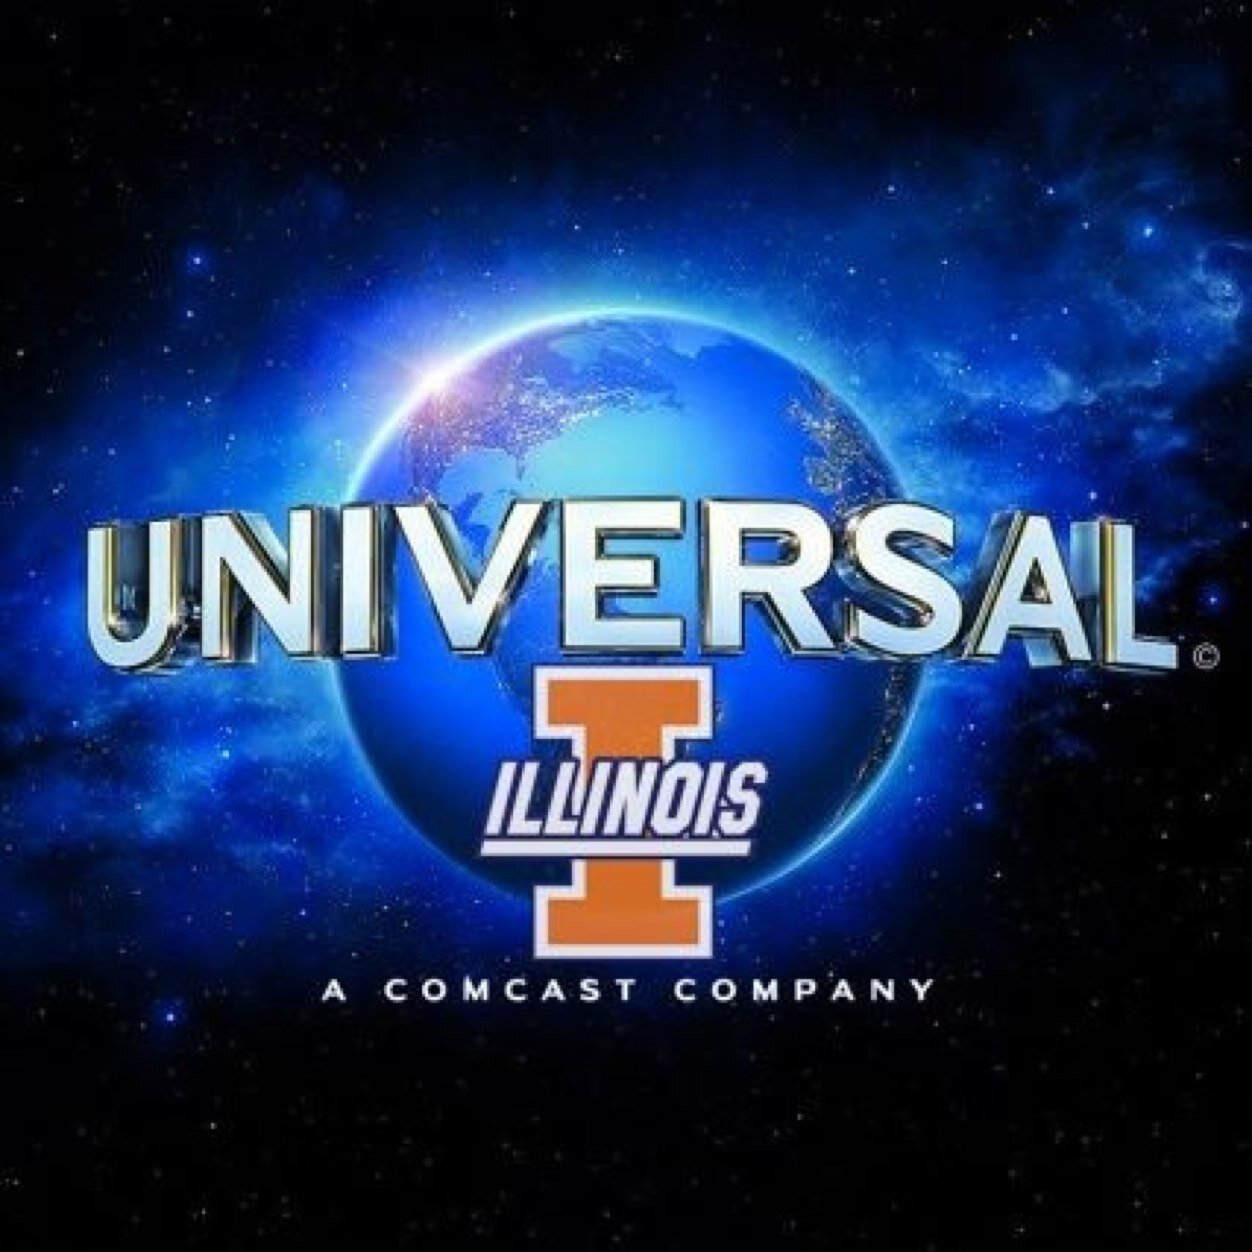 Campus Rep for Universal Pictures. Stay up to date on new films and DVD releases that Universal Pictures has to offer on the UIUC Campus